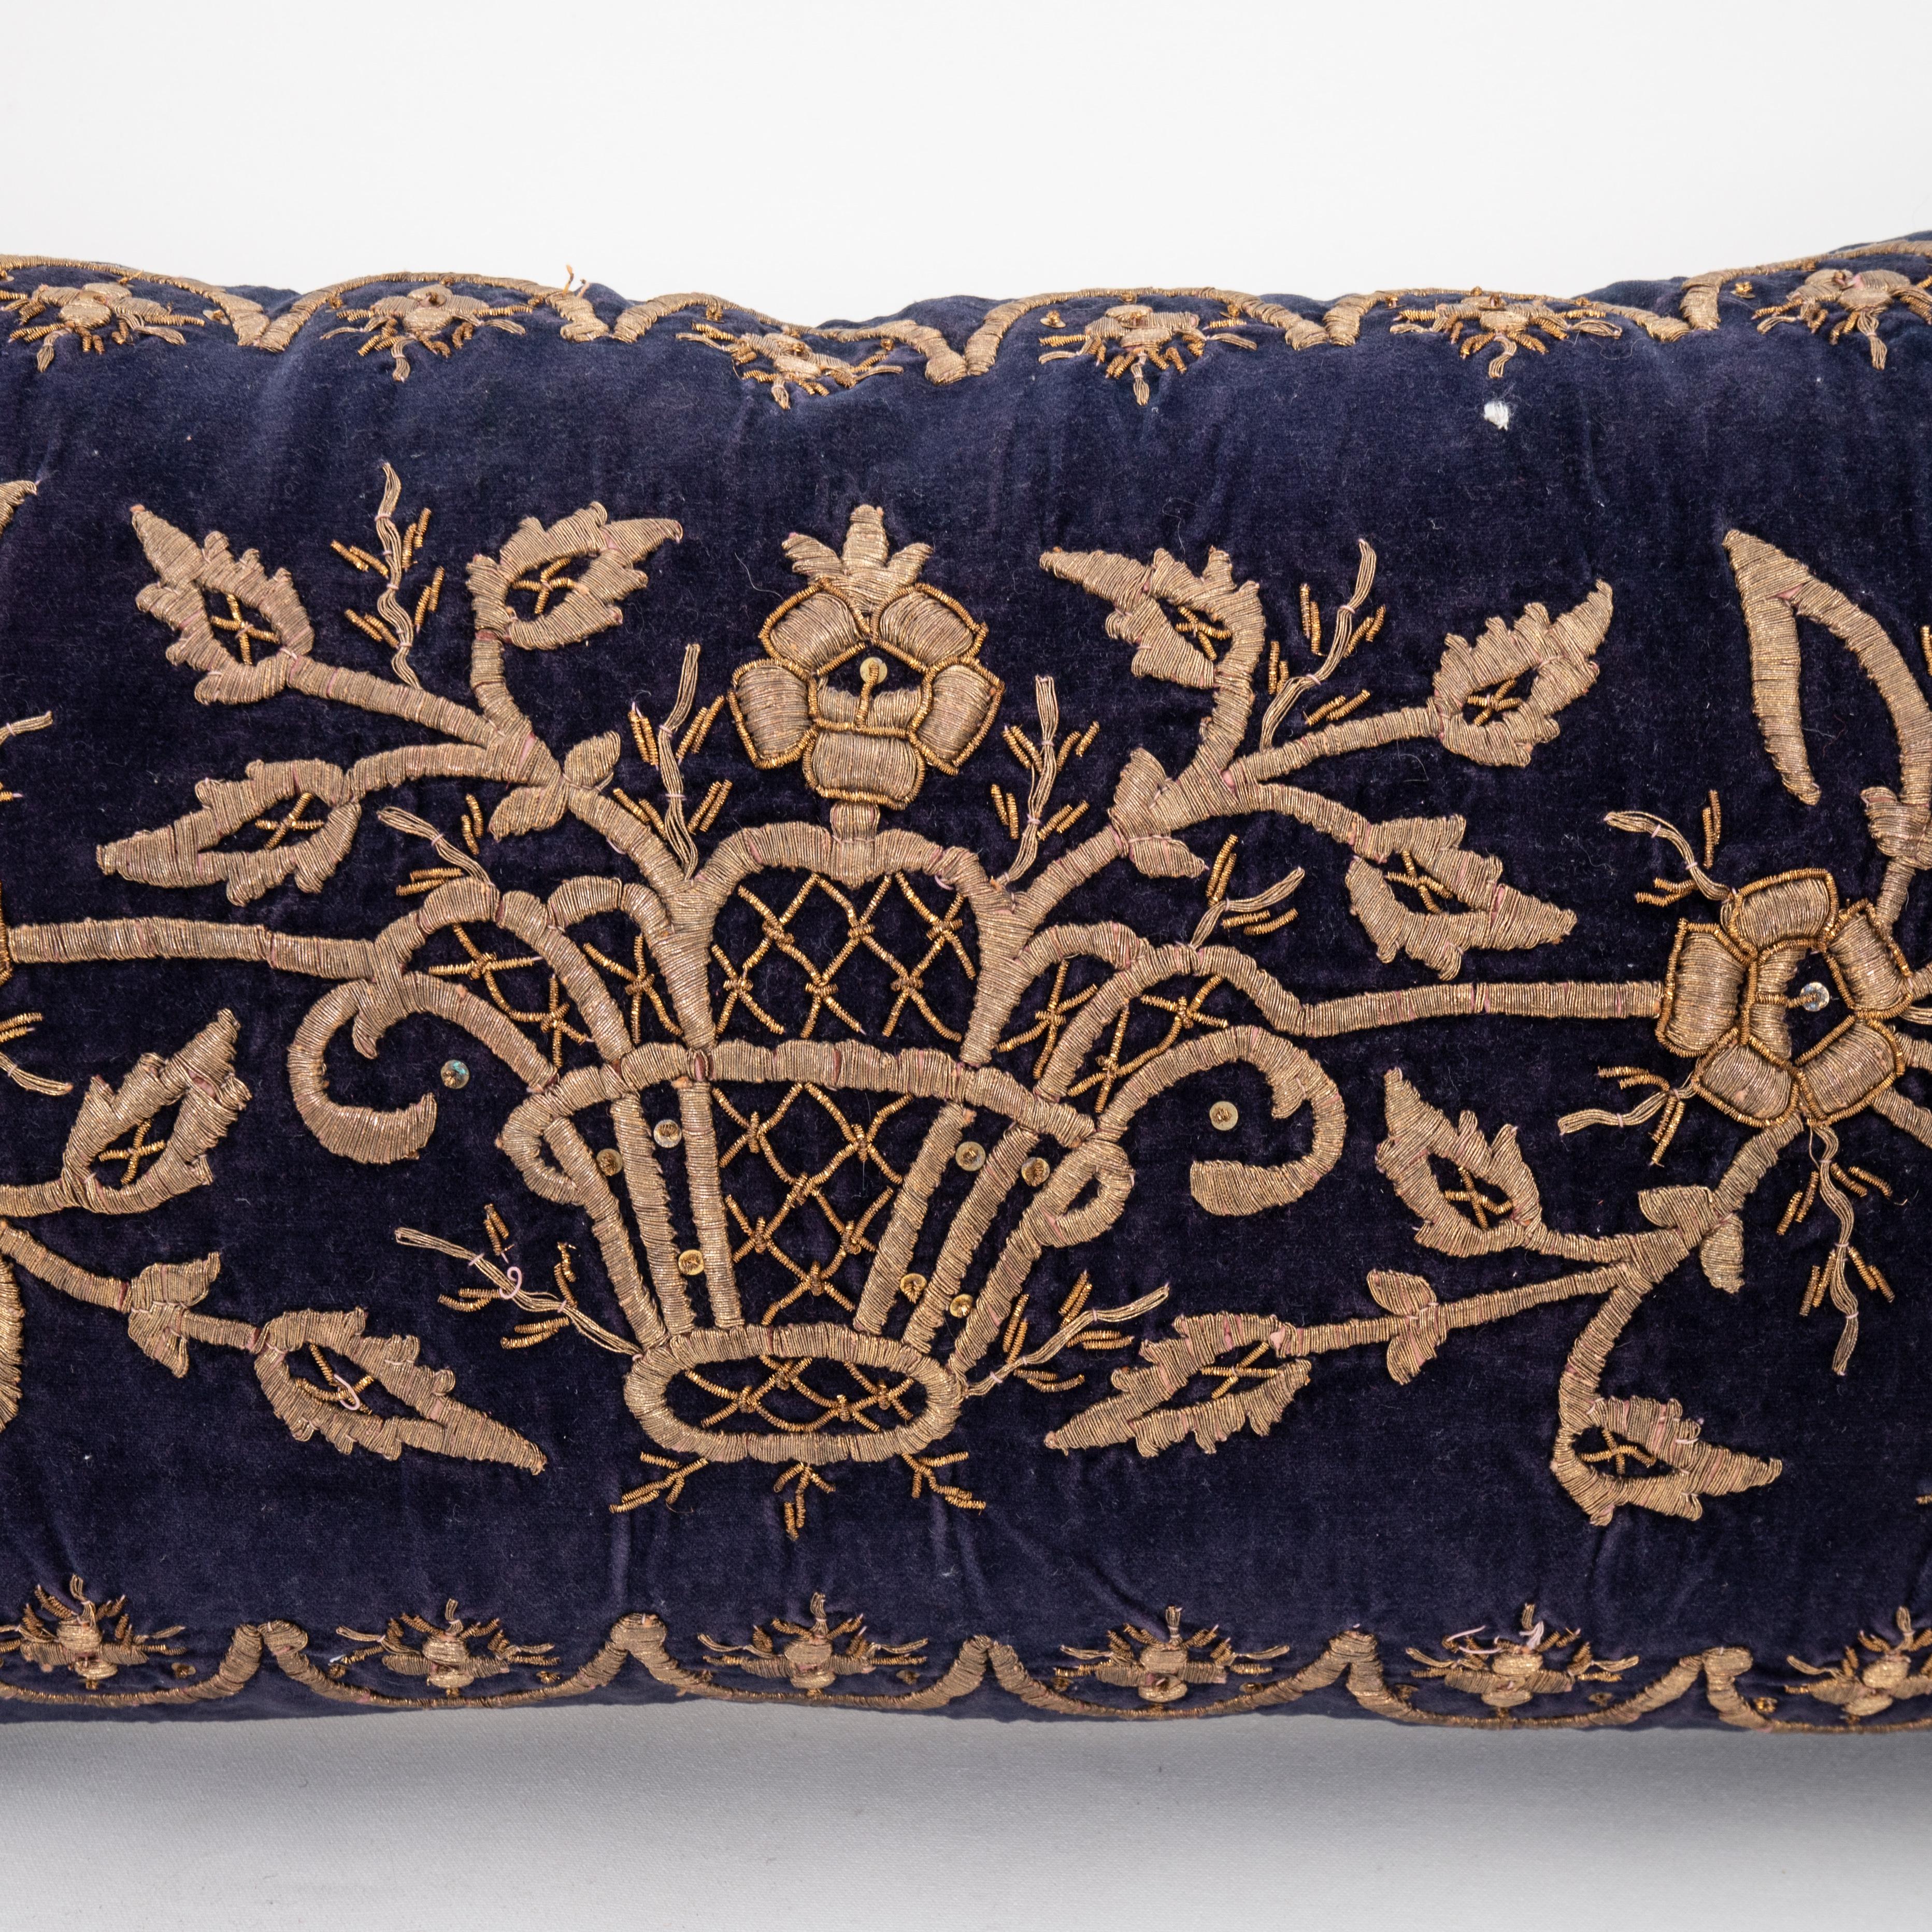 Ottoman / Turkish Pillow Cover in Sarma Technique, late 19th / Early 20th C. In Fair Condition For Sale In Istanbul, TR